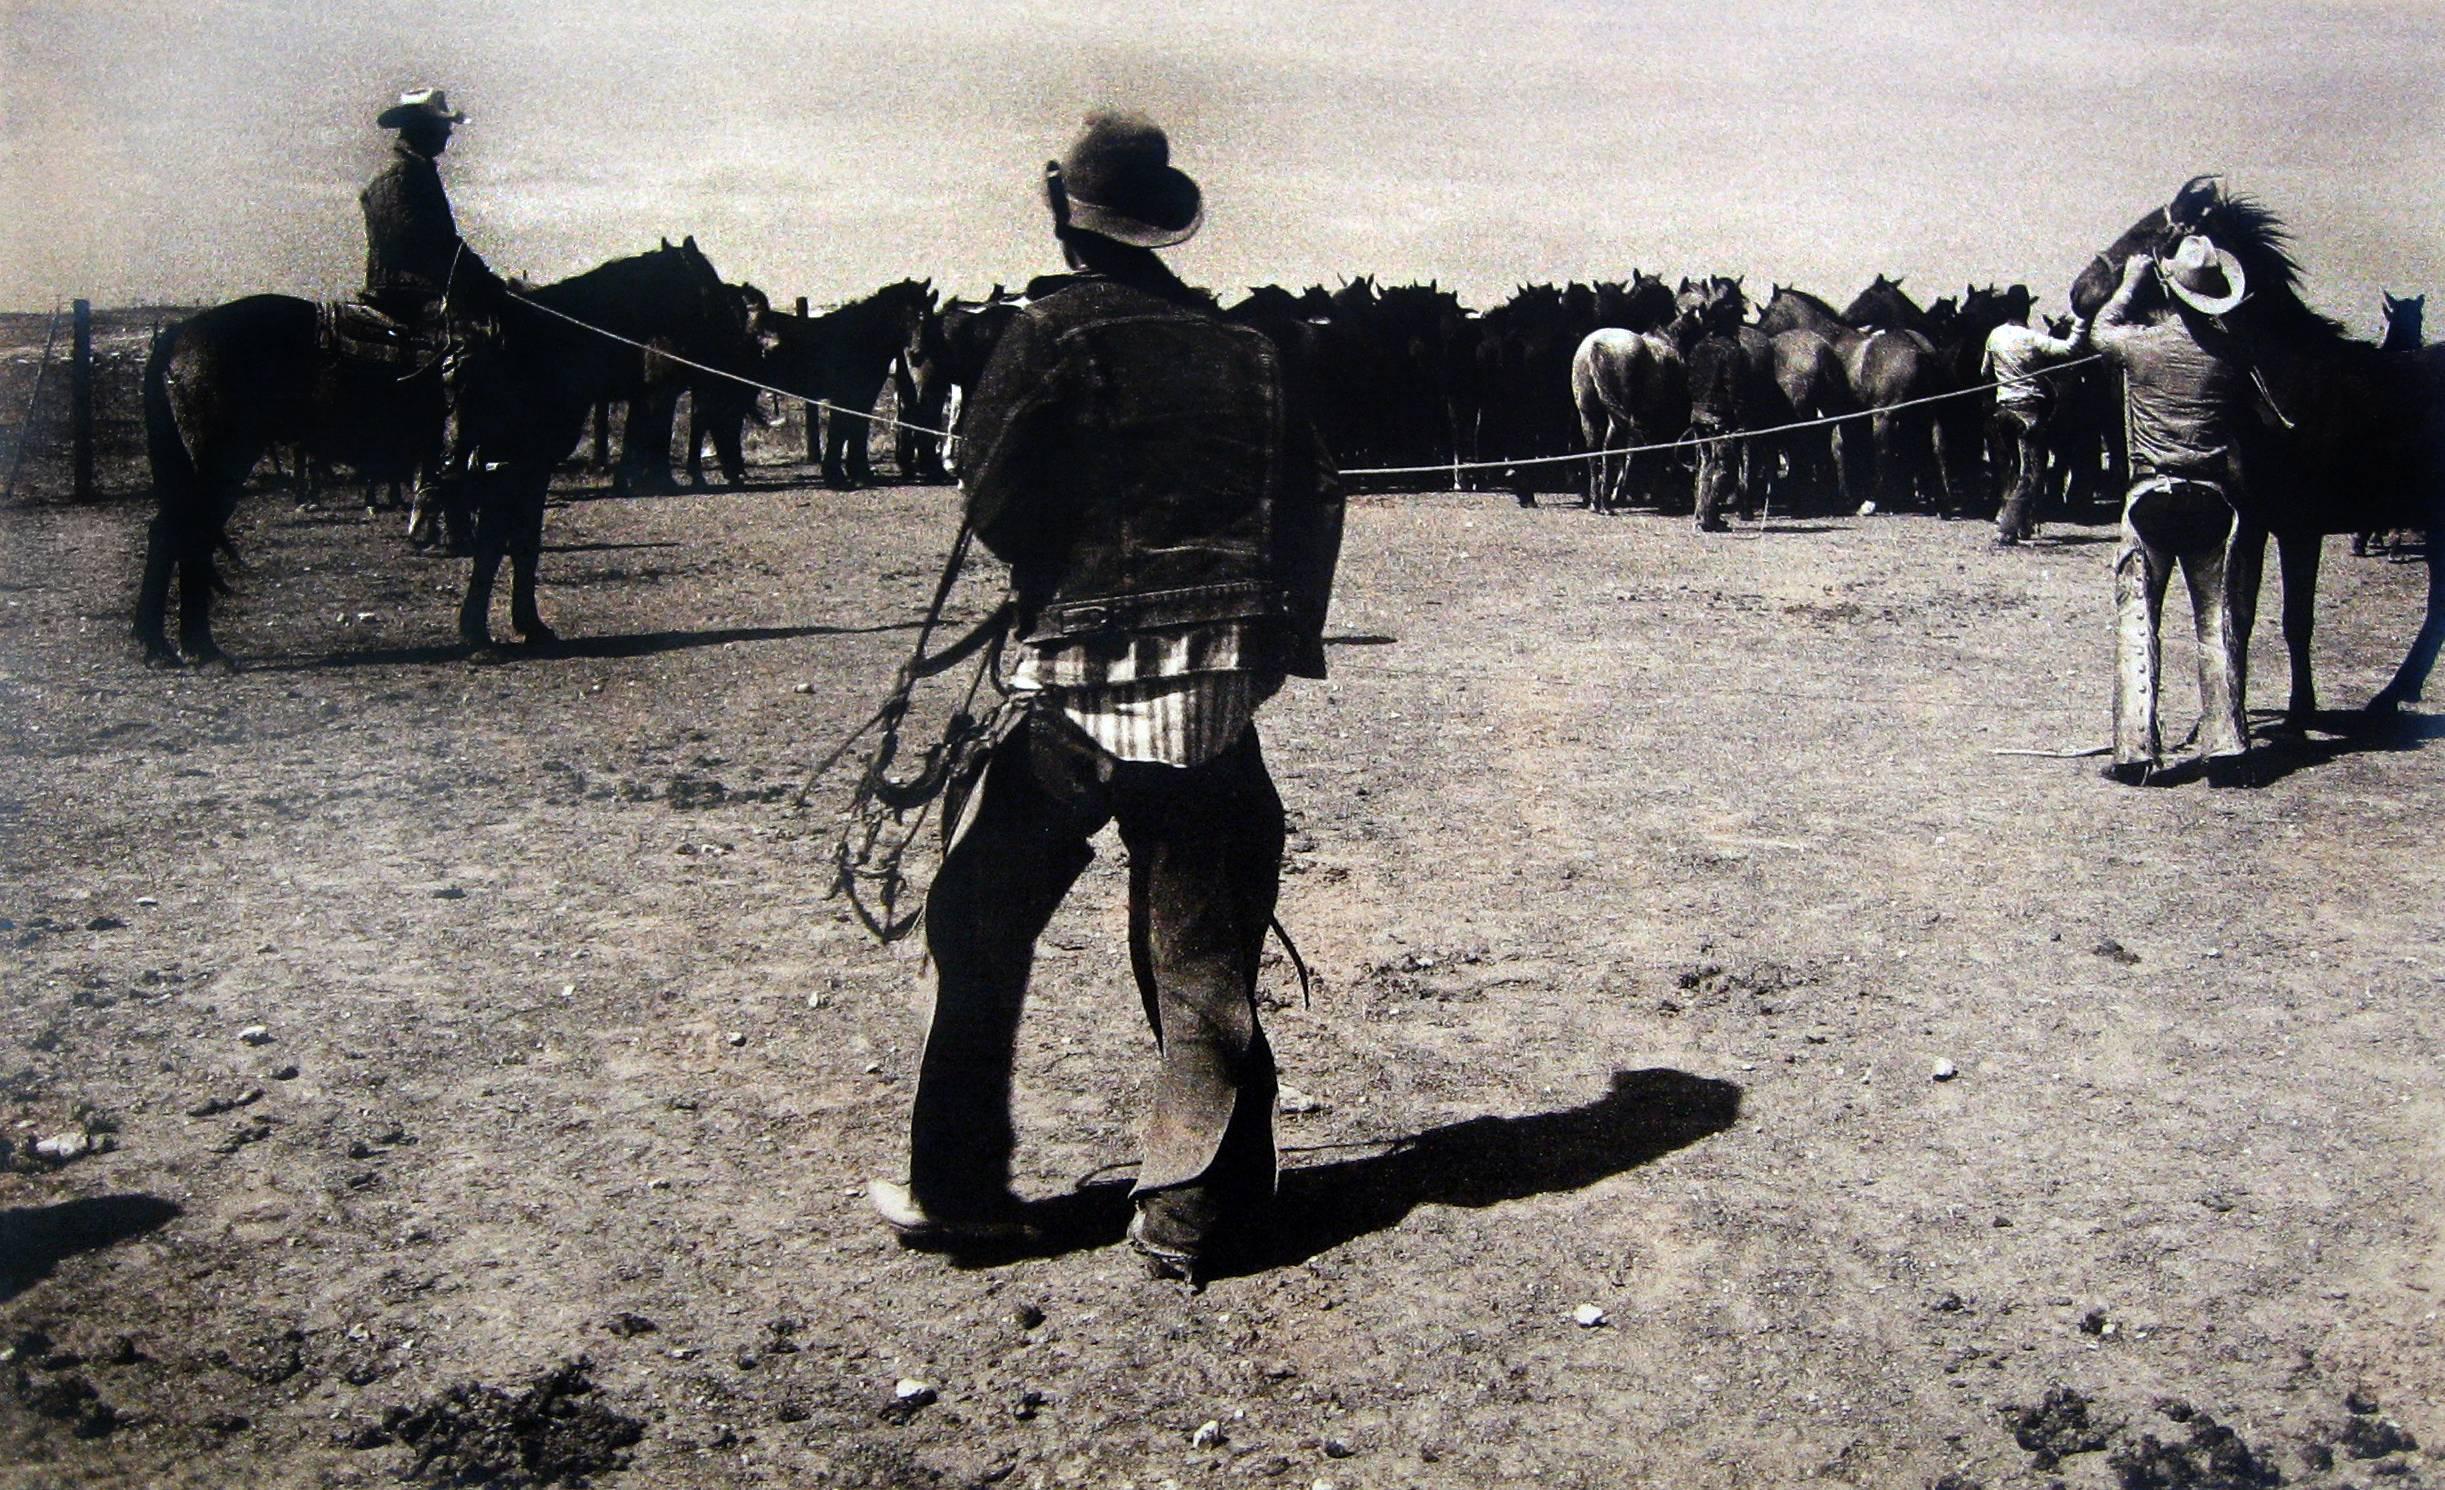 Bank Langmore Black and White Photograph - Untitled (Cowboys with Rope and Horses)